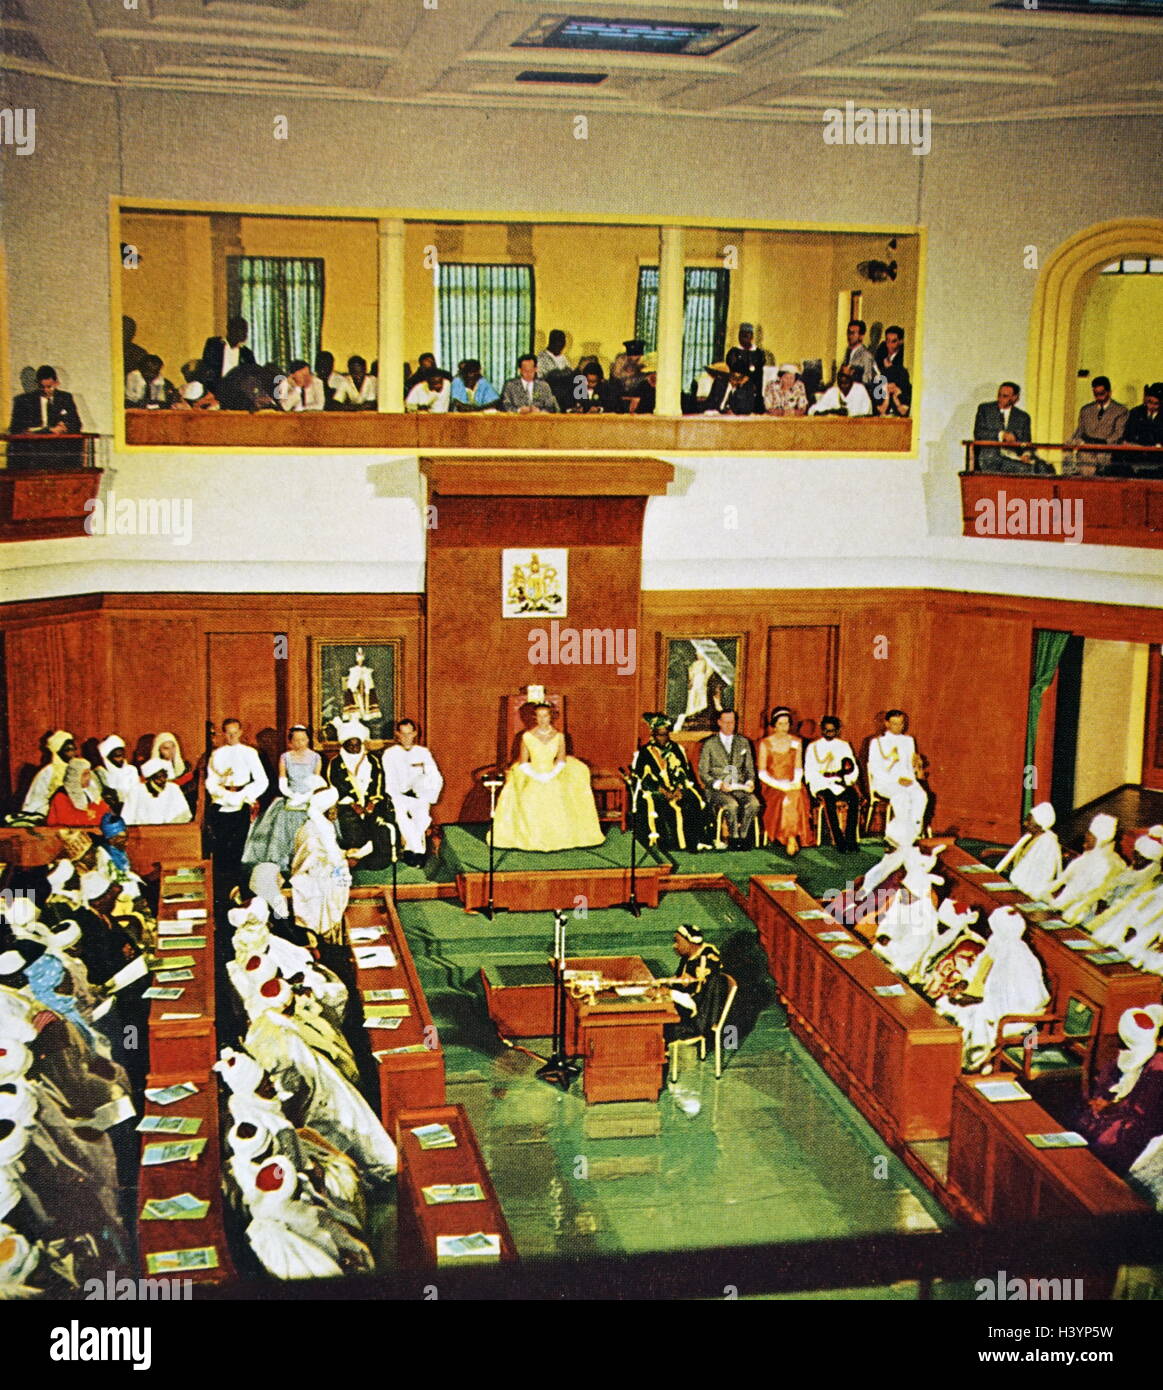 Princess Alexandra of Kent, representing Queen Elizabeth II, for the State Opening of the first Parliament of the Independent State of Nigeria. Dated 20th Century Stock Photo